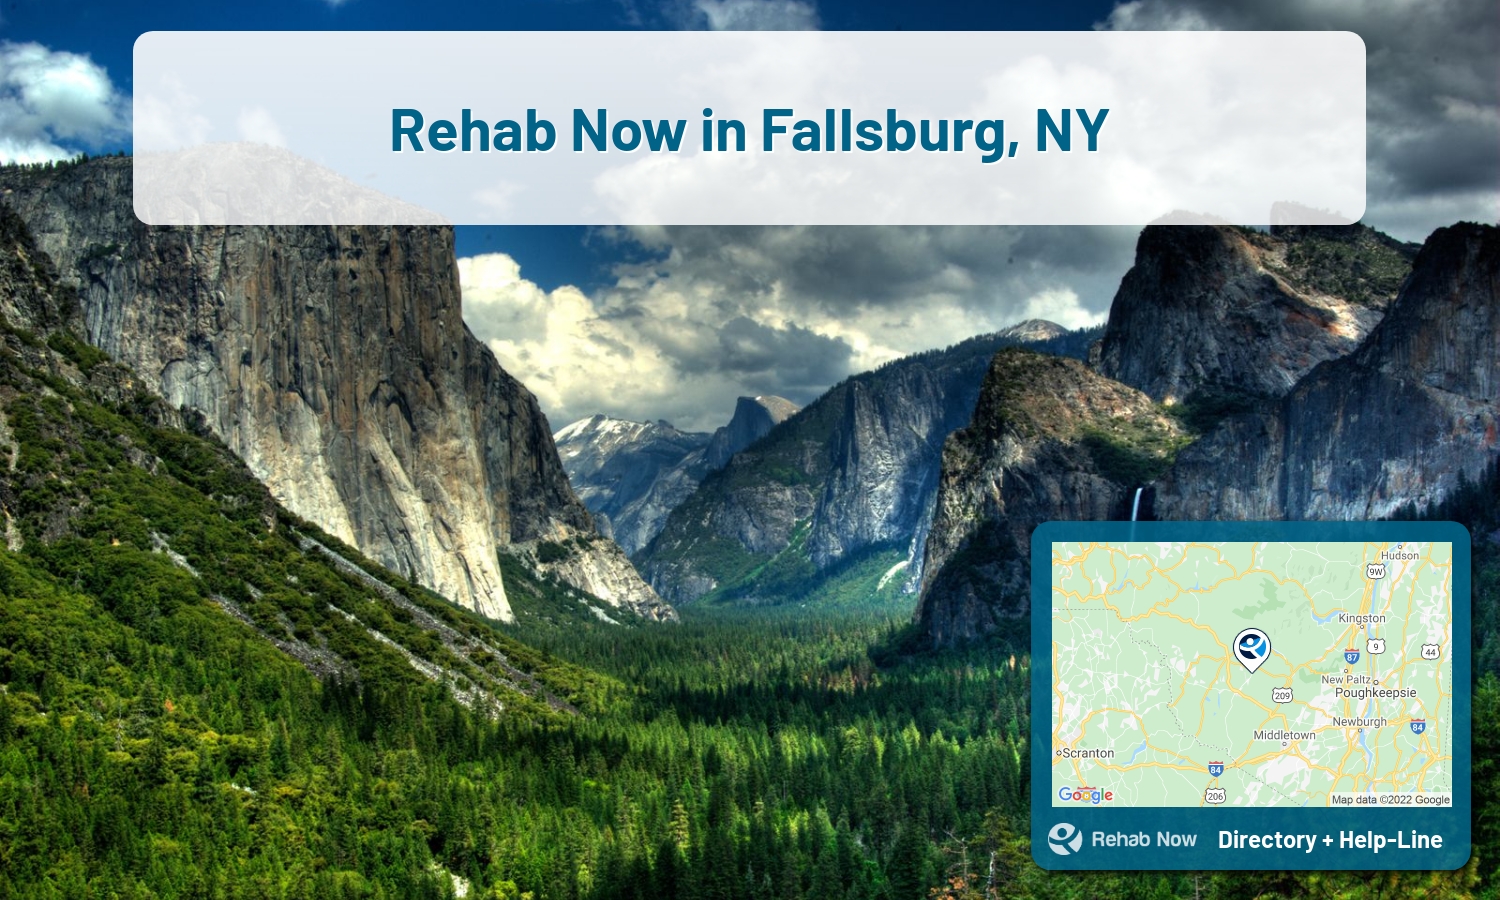 Drug rehab and alcohol treatment services near you in Fallsburg, New York. Need help choosing a center? Call us, free.